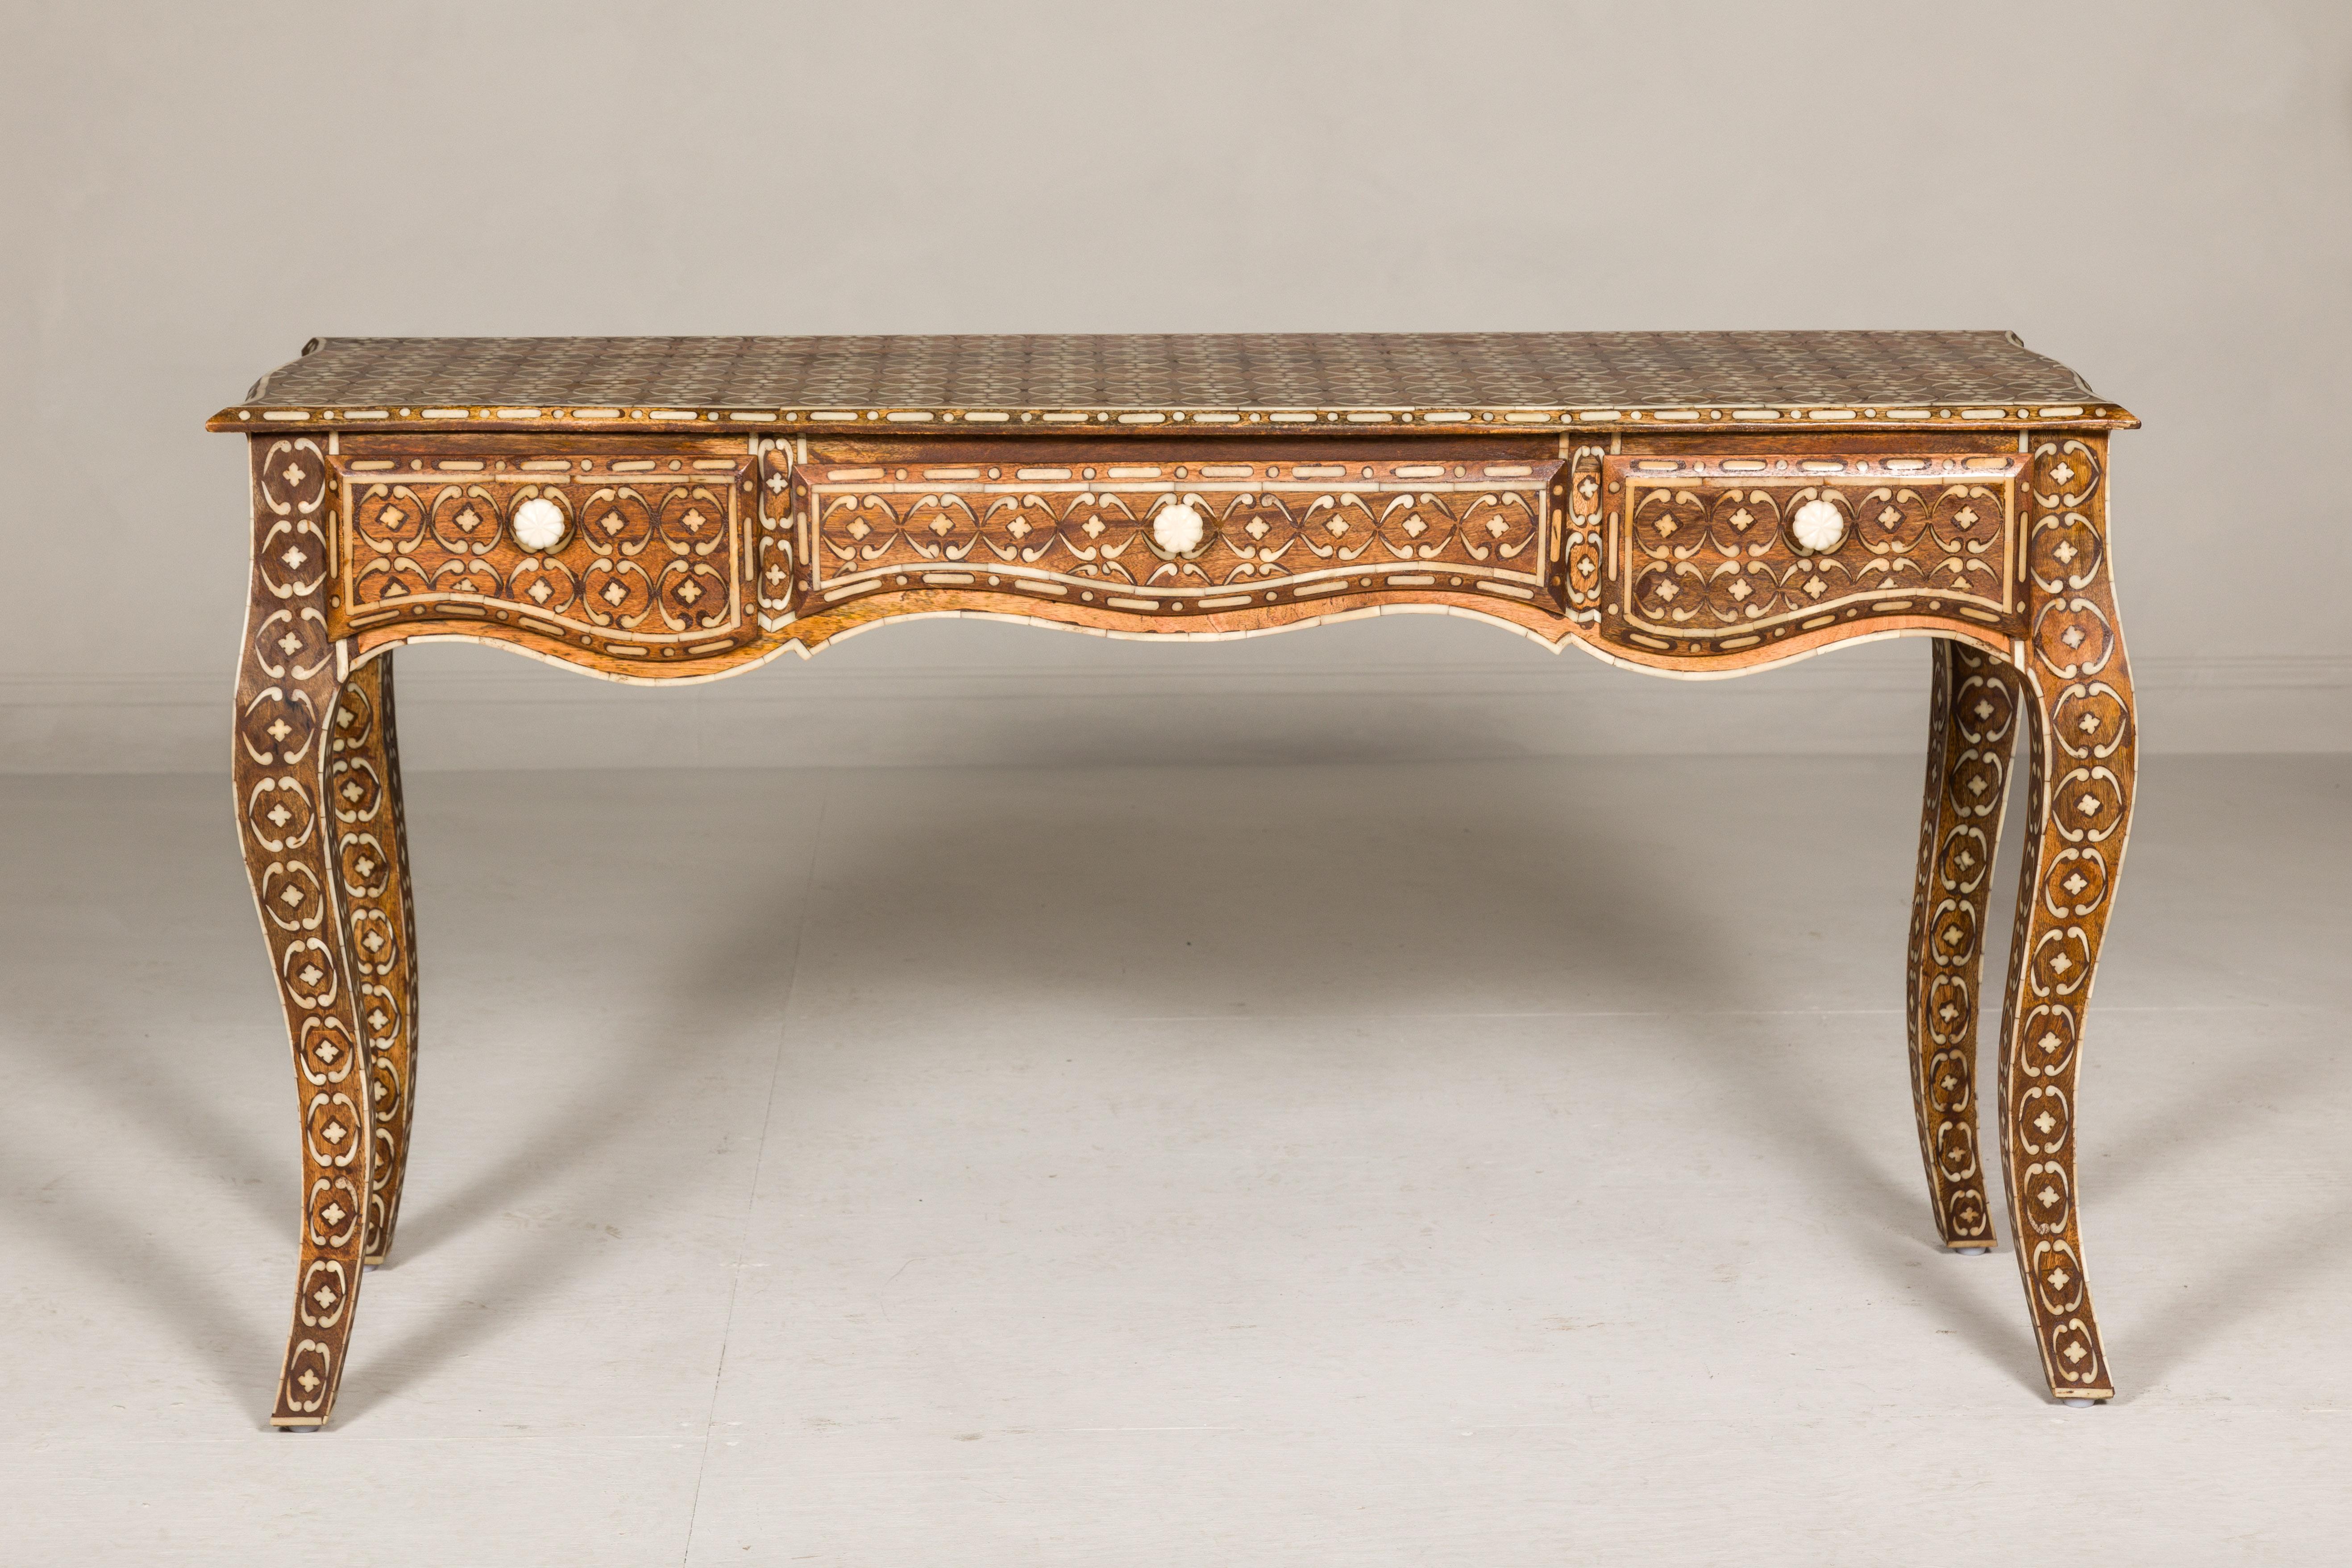 Anglo-Indian Louis XV style mango wood console table or desk with inlaid bone décor. A sublime marriage of East meets West, this Anglo-Indian Louis XV style console table or desk is an ode to opulence and artistry. Crafted from robust mango wood,